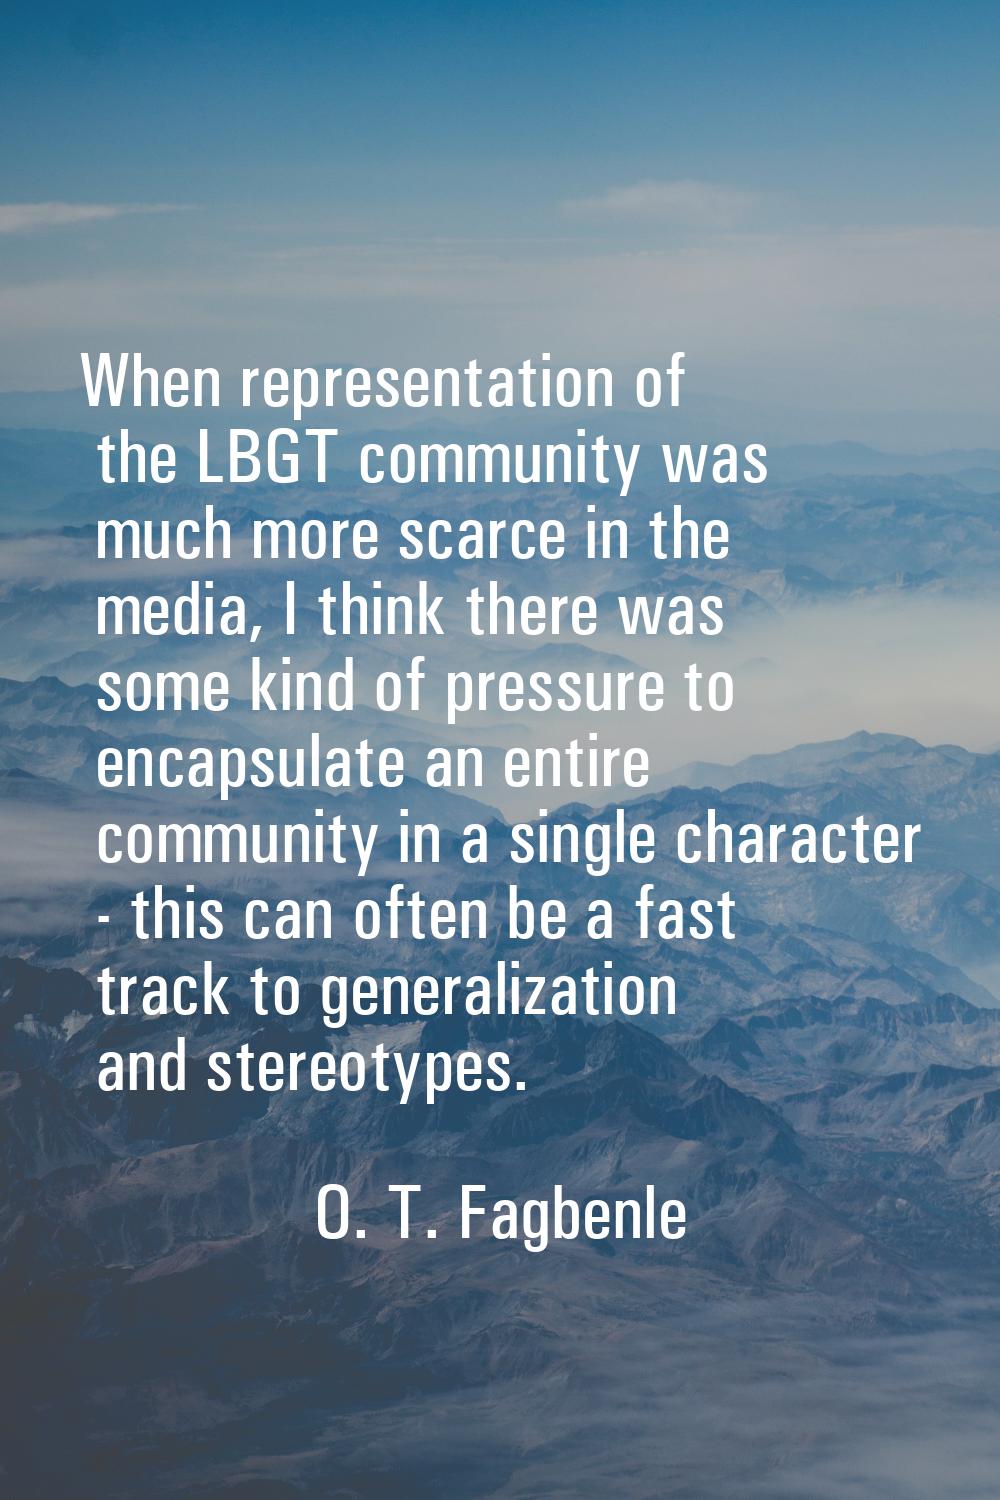 When representation of the LBGT community was much more scarce in the media, I think there was some